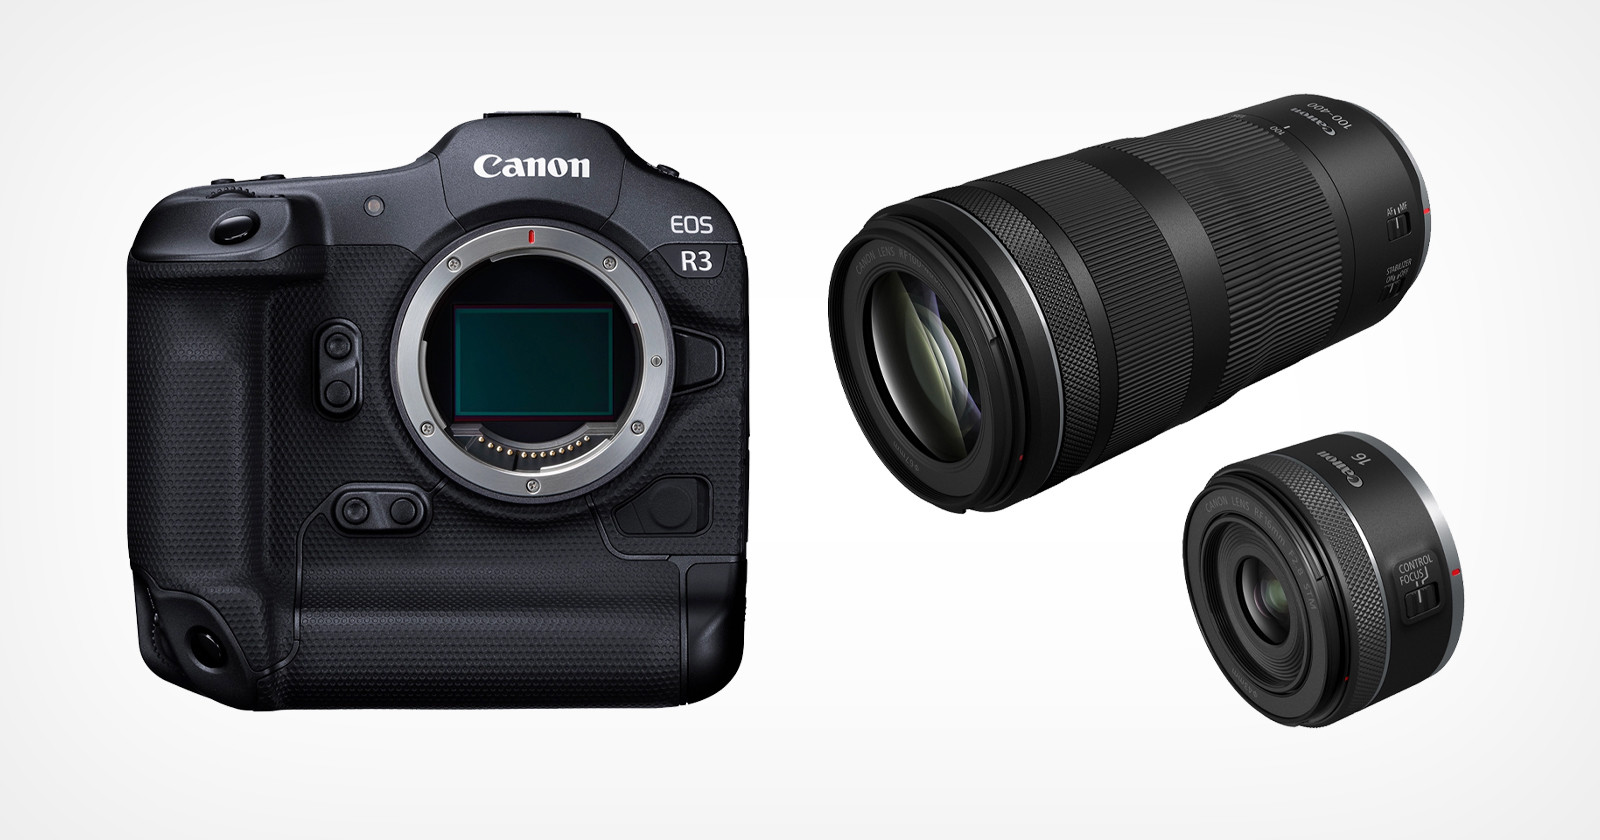 Canon Says it Cant Meet Demand for the R3 or Any of its New Lenses